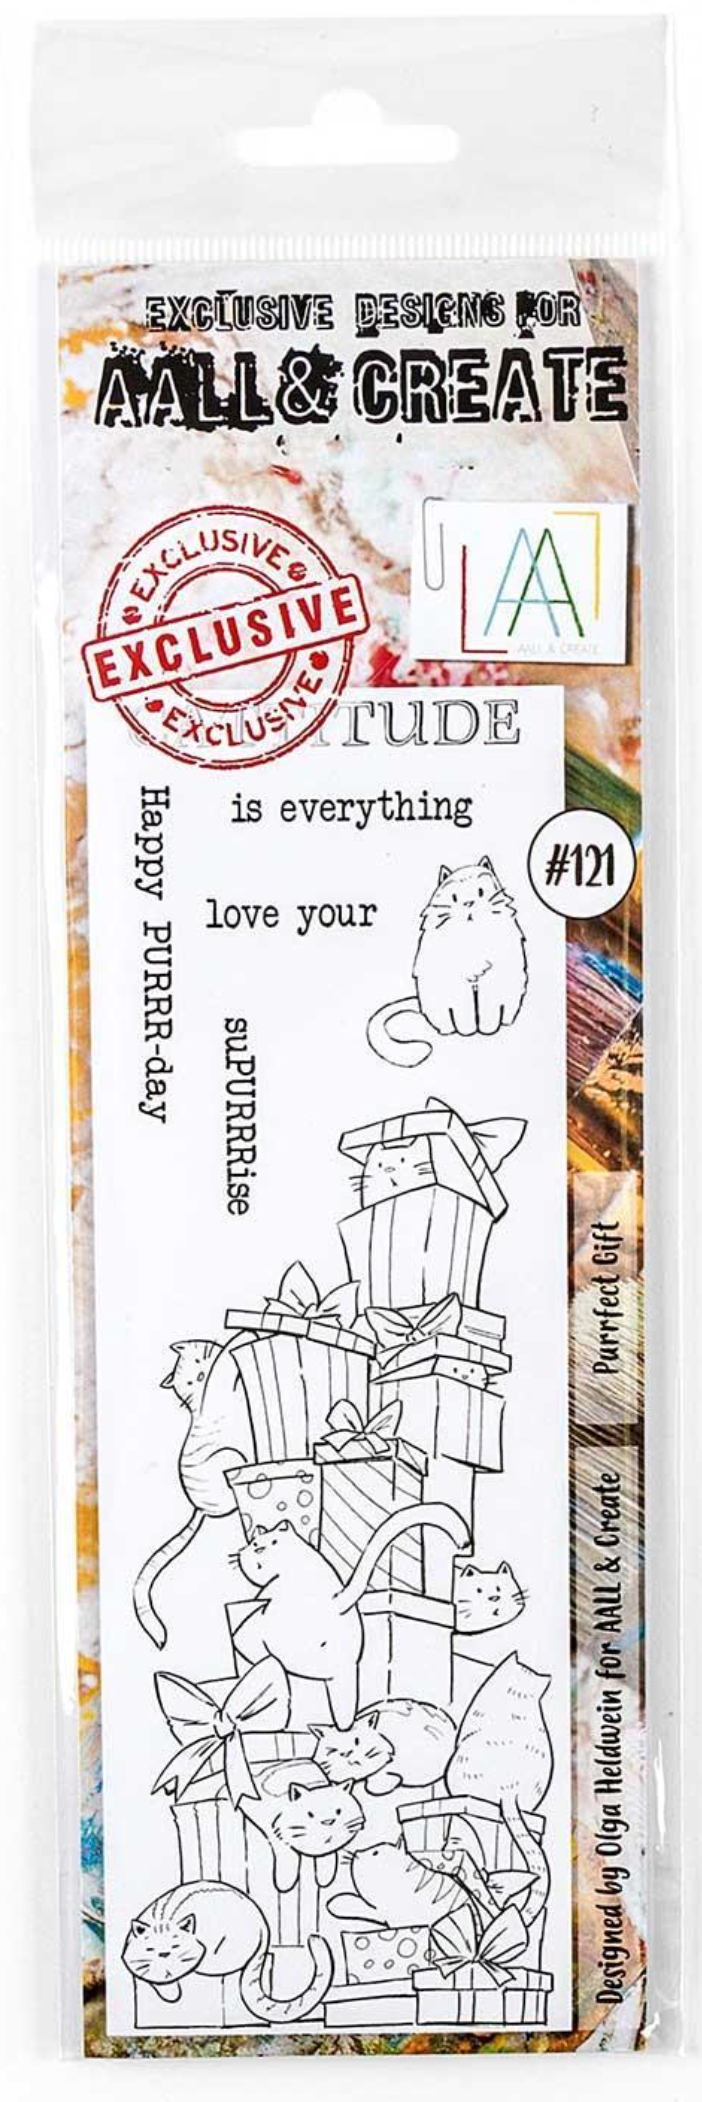 Aall and Create - Purrfect Gift - Border Stamp - Designer Olga Heldwein - Clear Stamp Set - #121